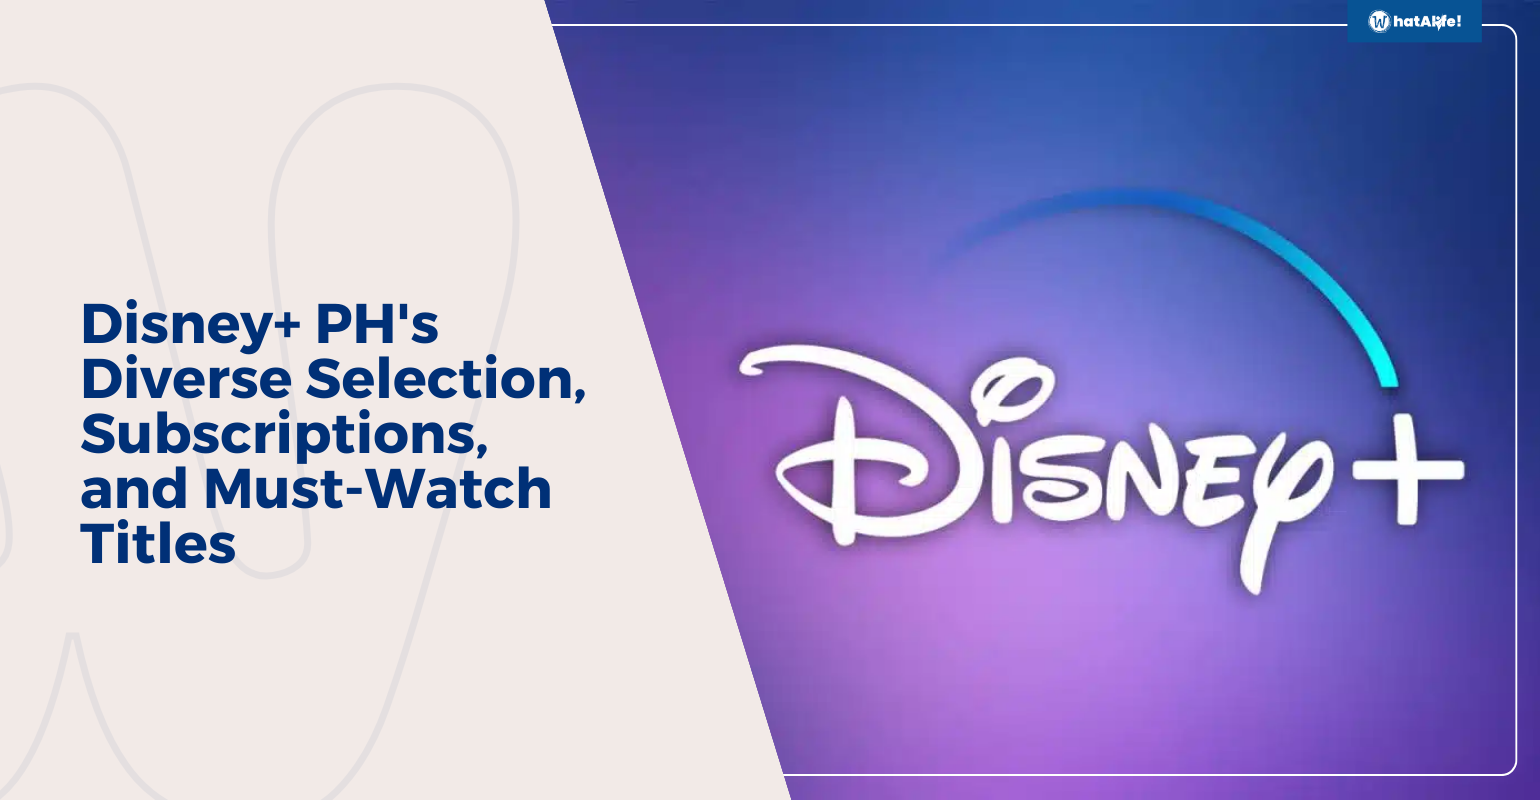 Disney+ PH’s Diverse Selection, Subscriptions, and Must-Watch Titles